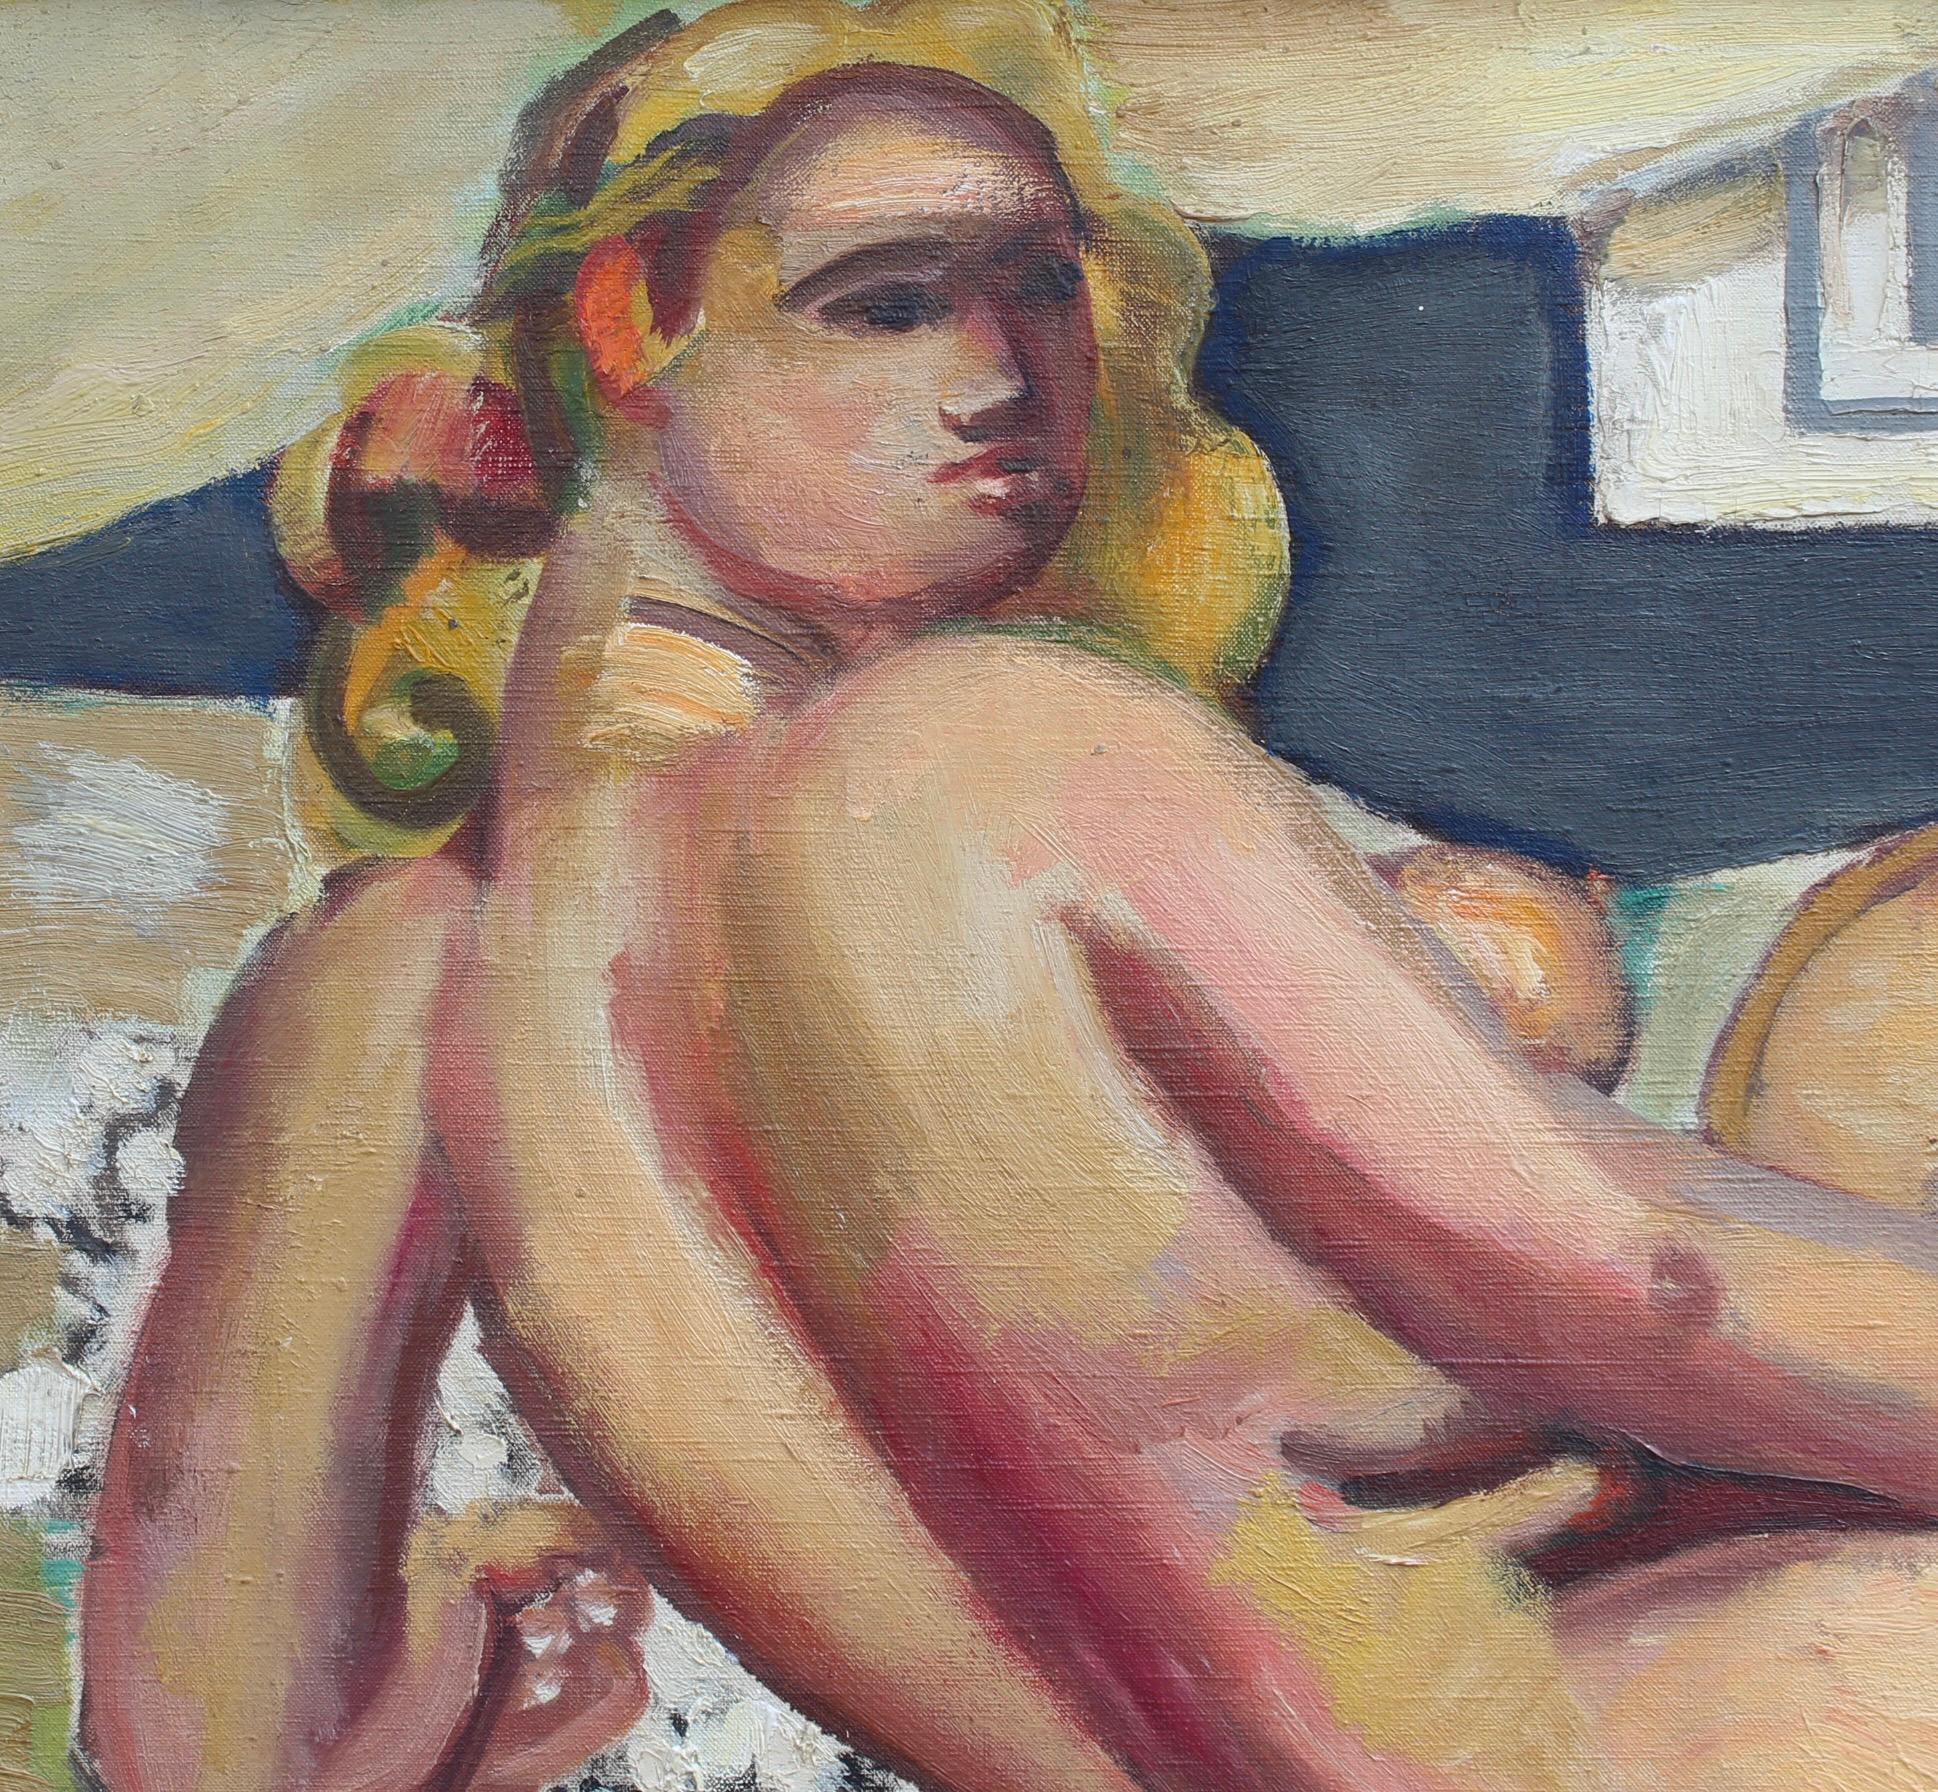 Nude Posing on the Sofa For Sale 1